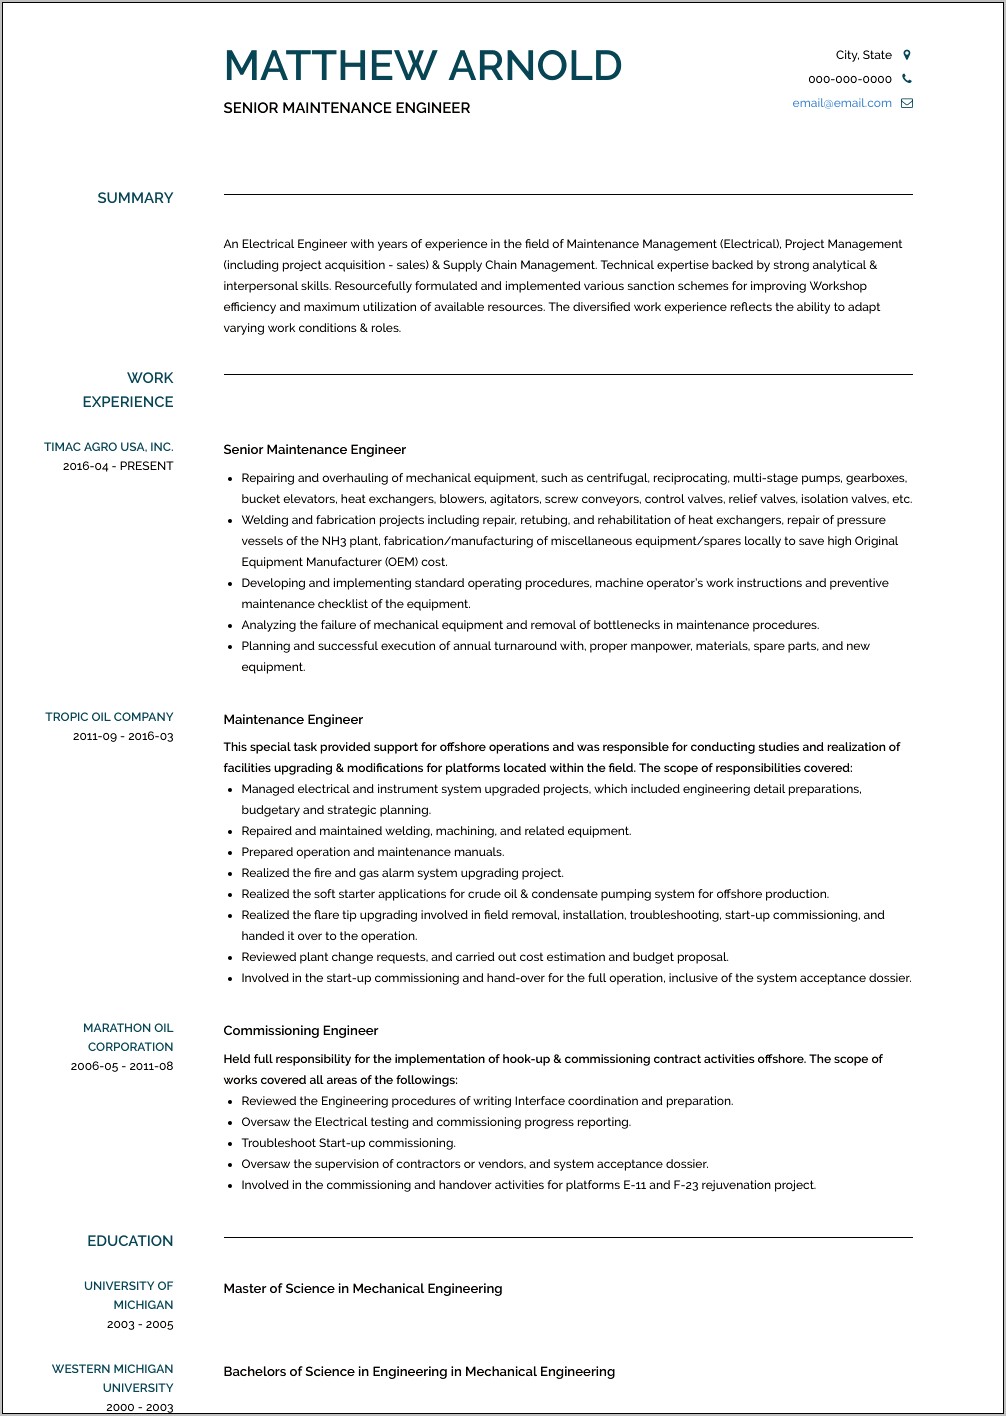 Resume Sample For Experienced Service Engineer